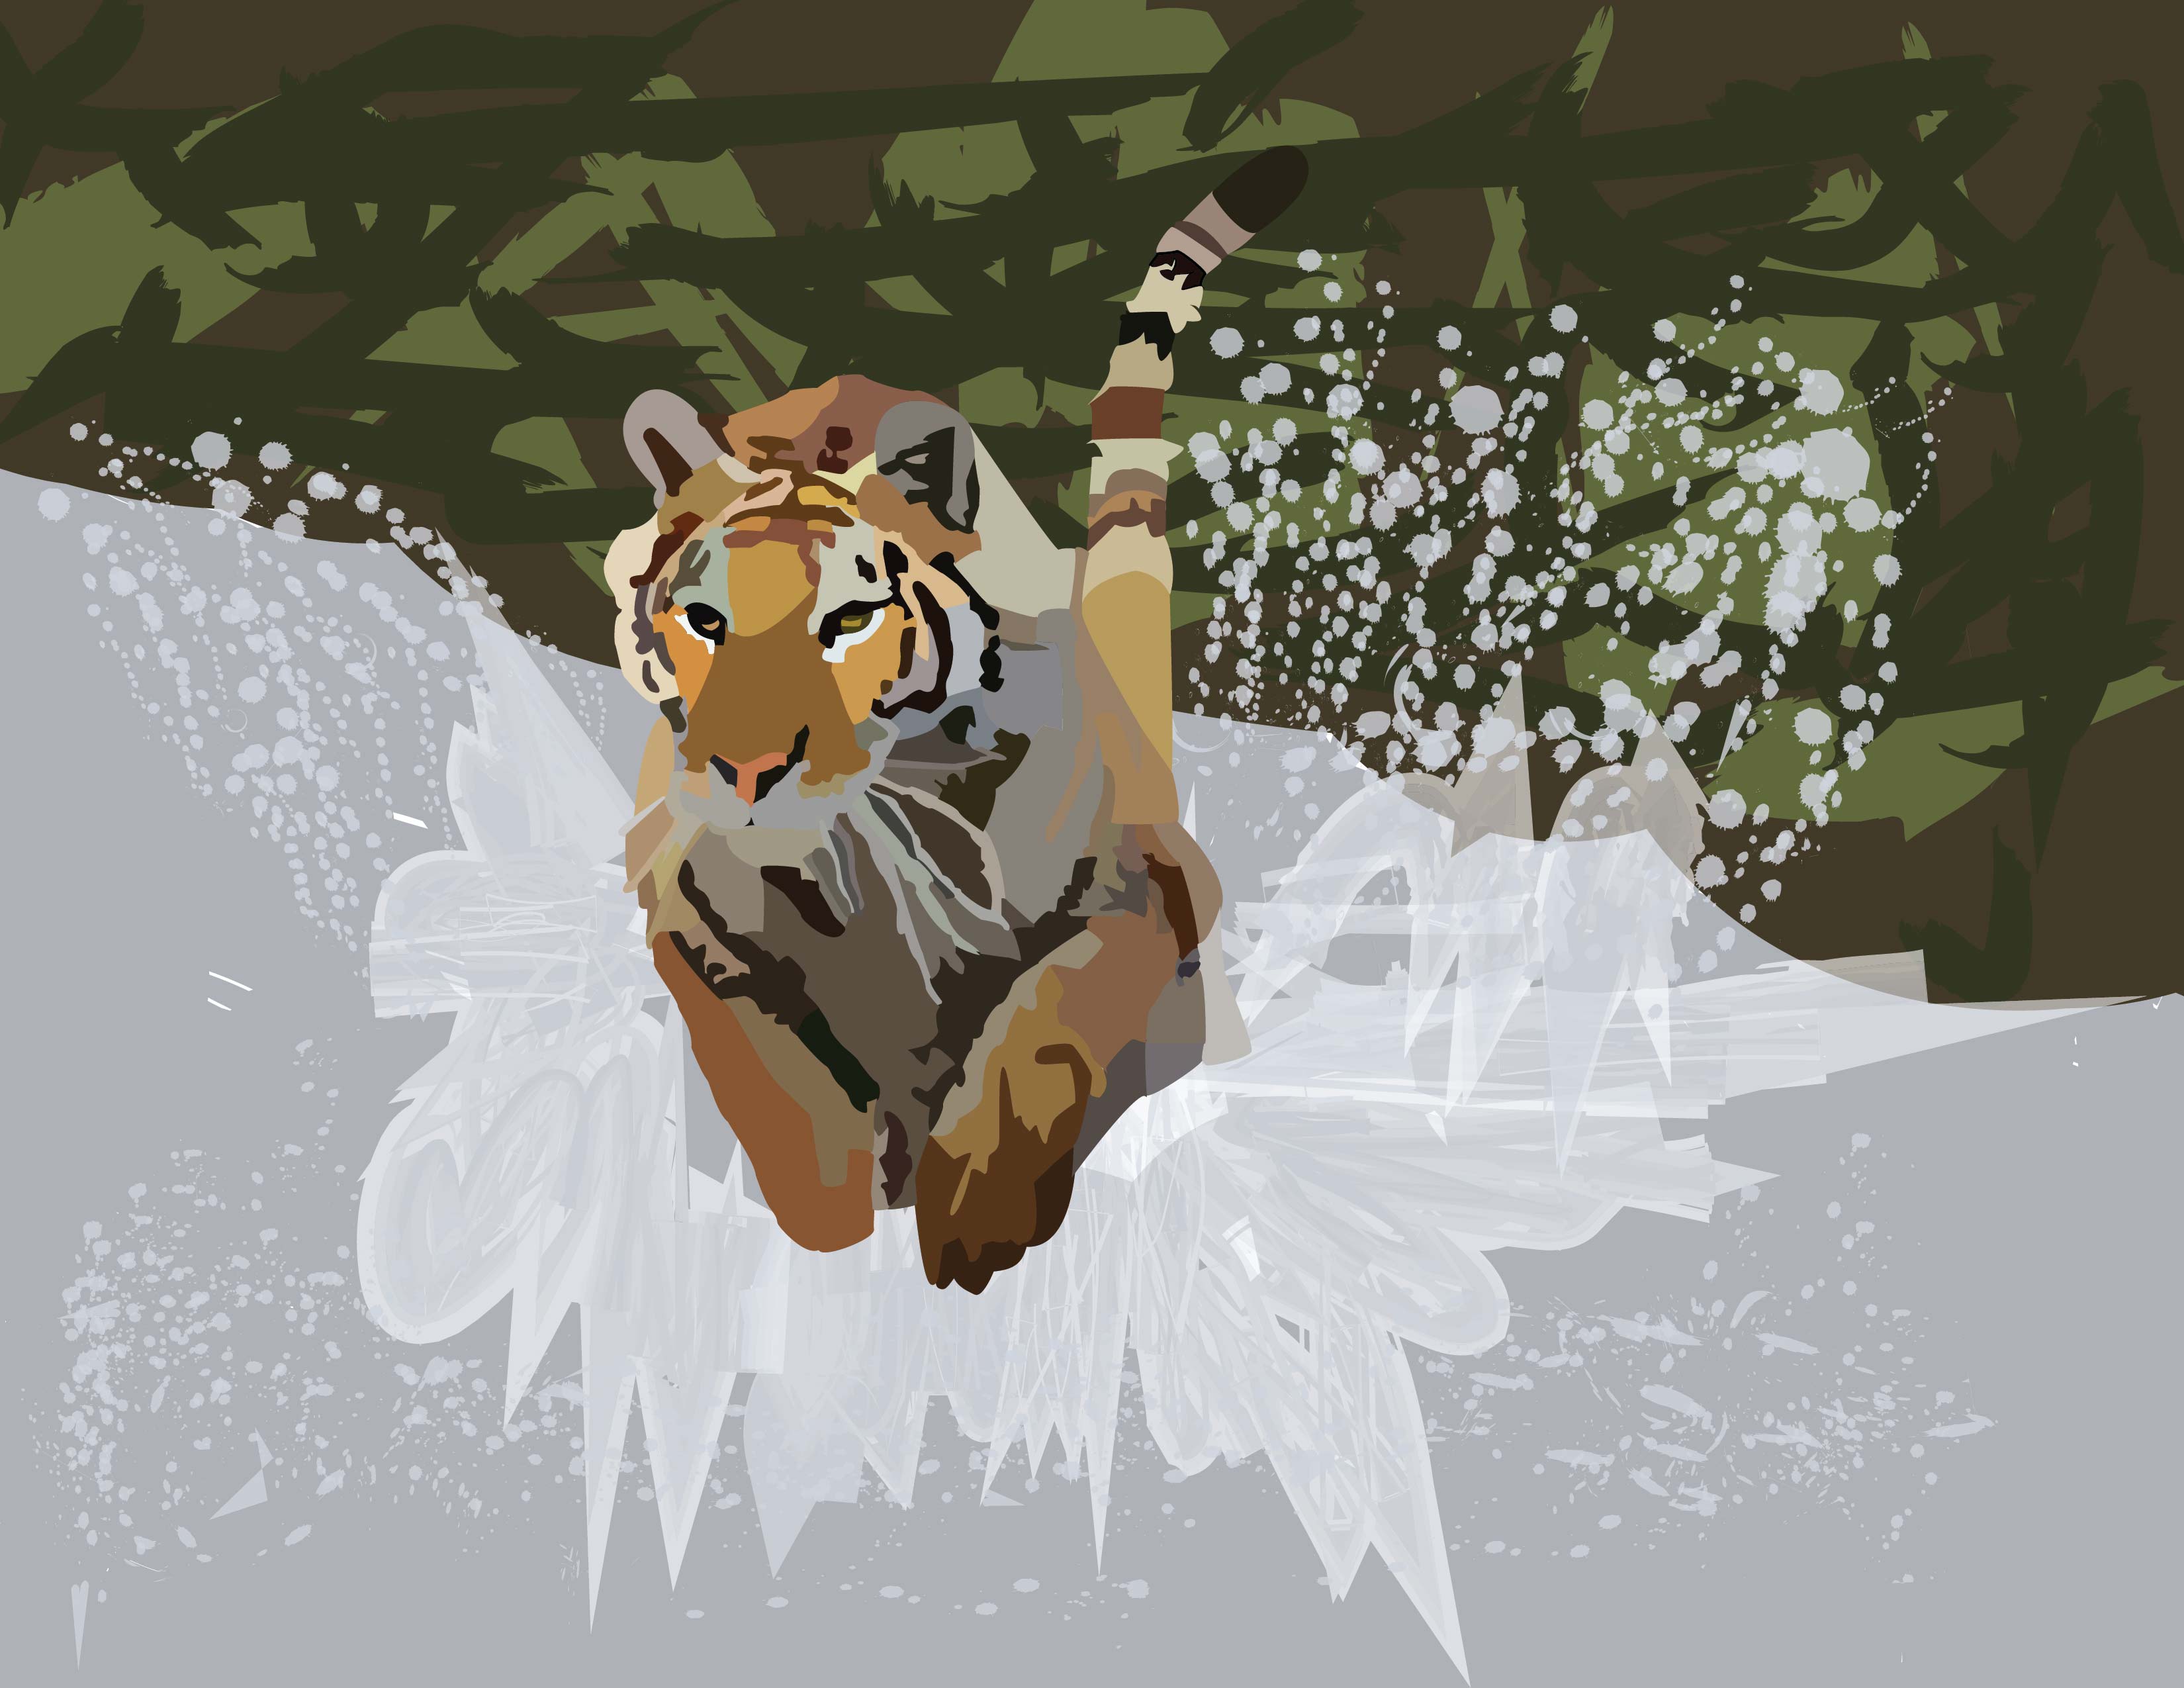 An illustration of a tiger in motion, running through water.